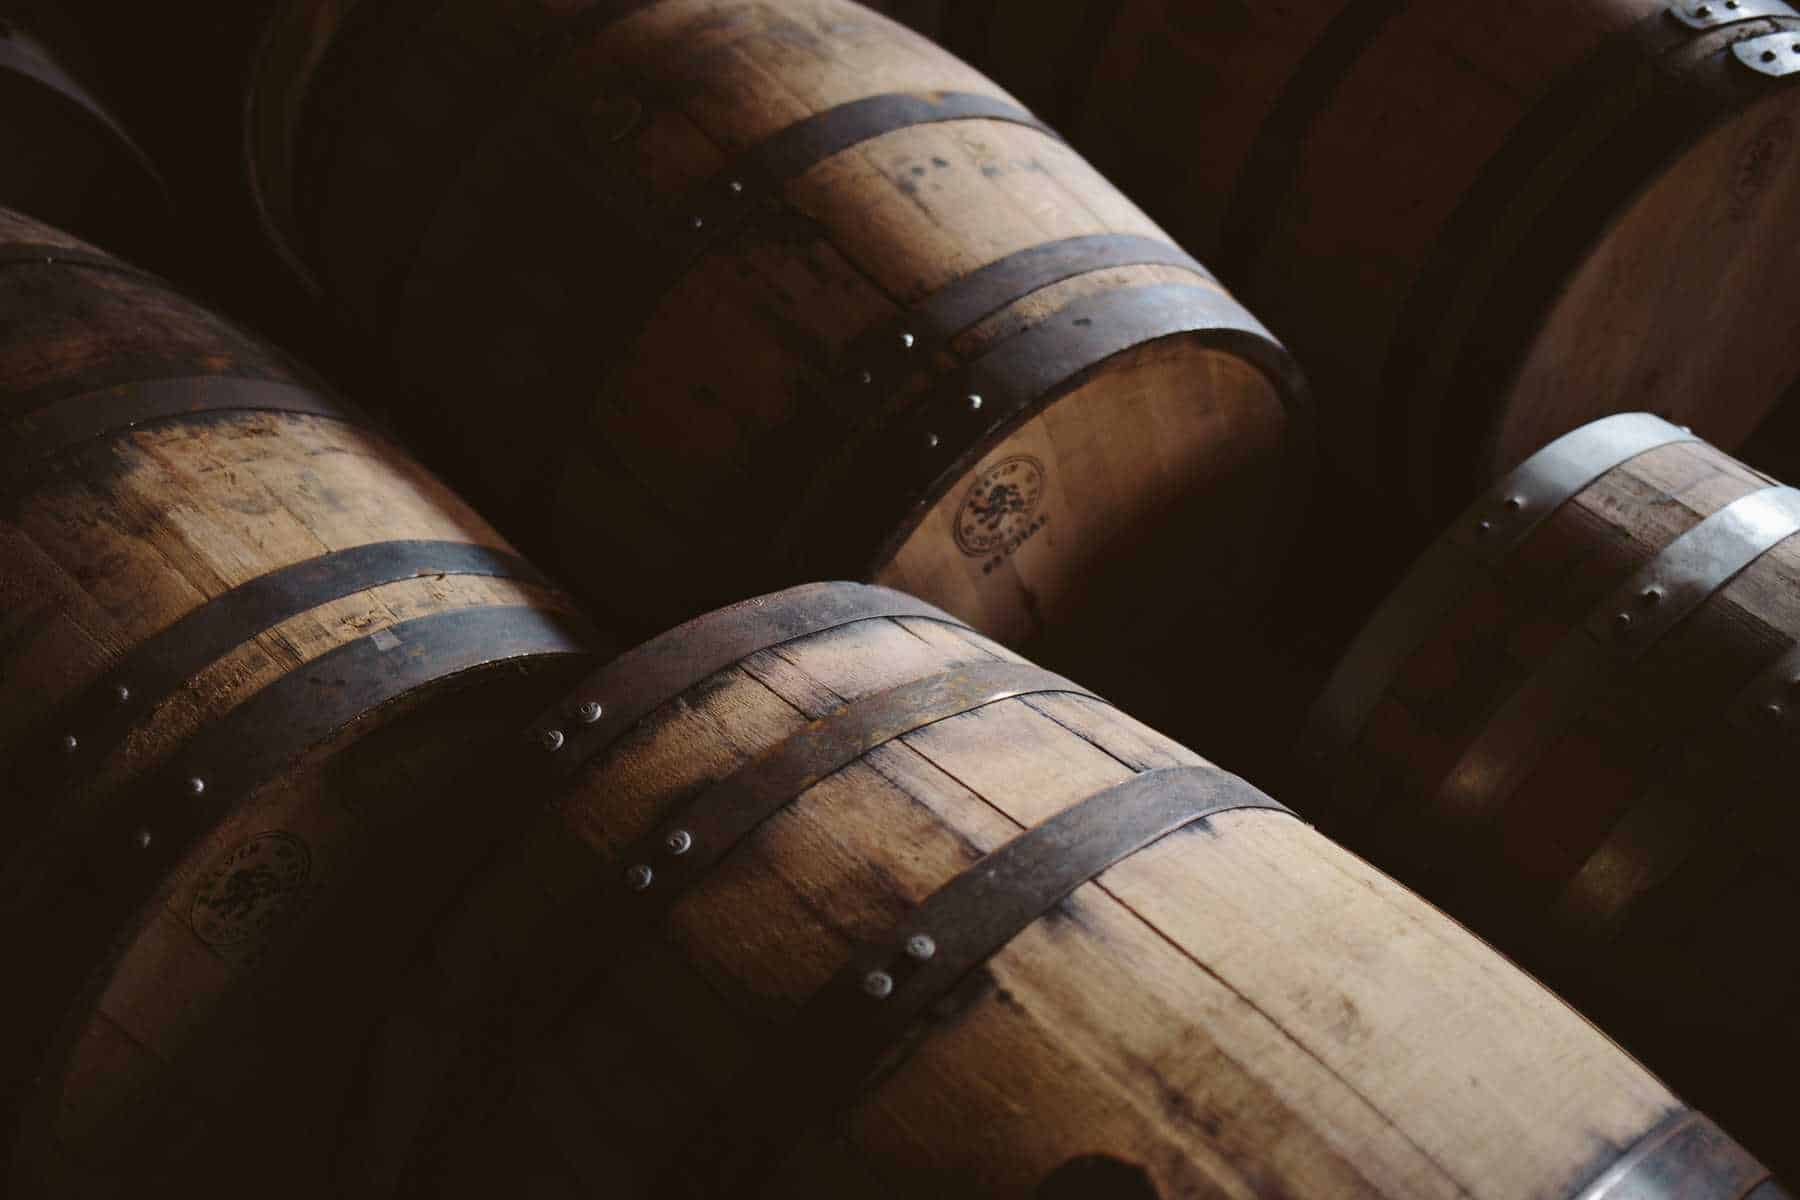 barrels on their sides in the shadows